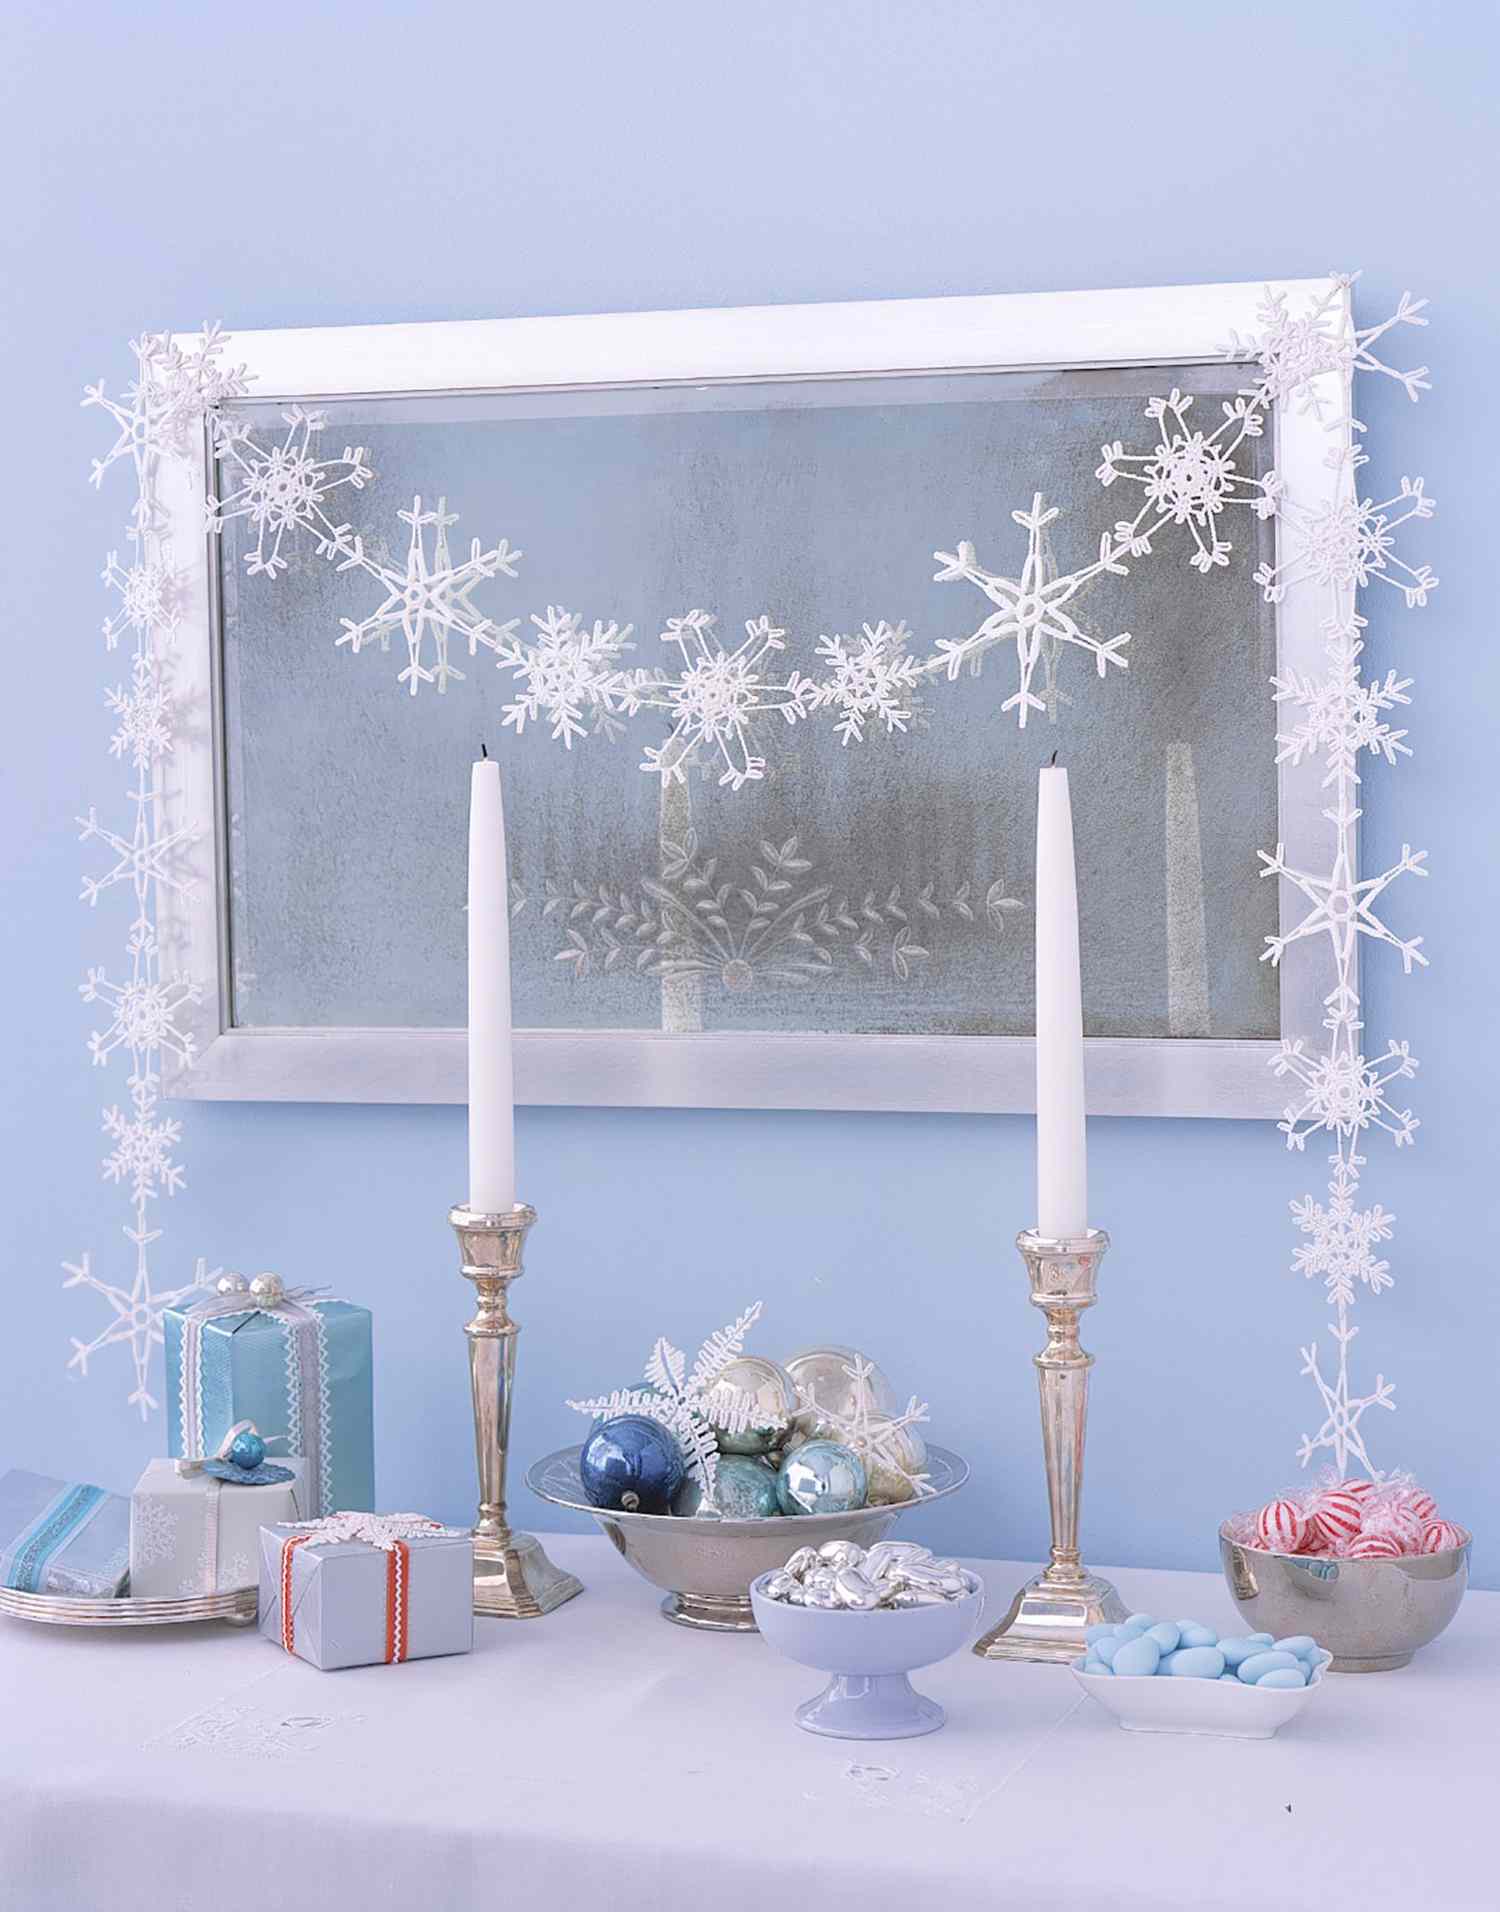 Decor365 Winter Wonderland White Snowflake Garland kit Hanging Snow Flakes for Christmas New Year Party Decoration for Home/Office/Showcase/Ceiling/Doorway/Mantel/Birthday/Baby Shower/Wedding/